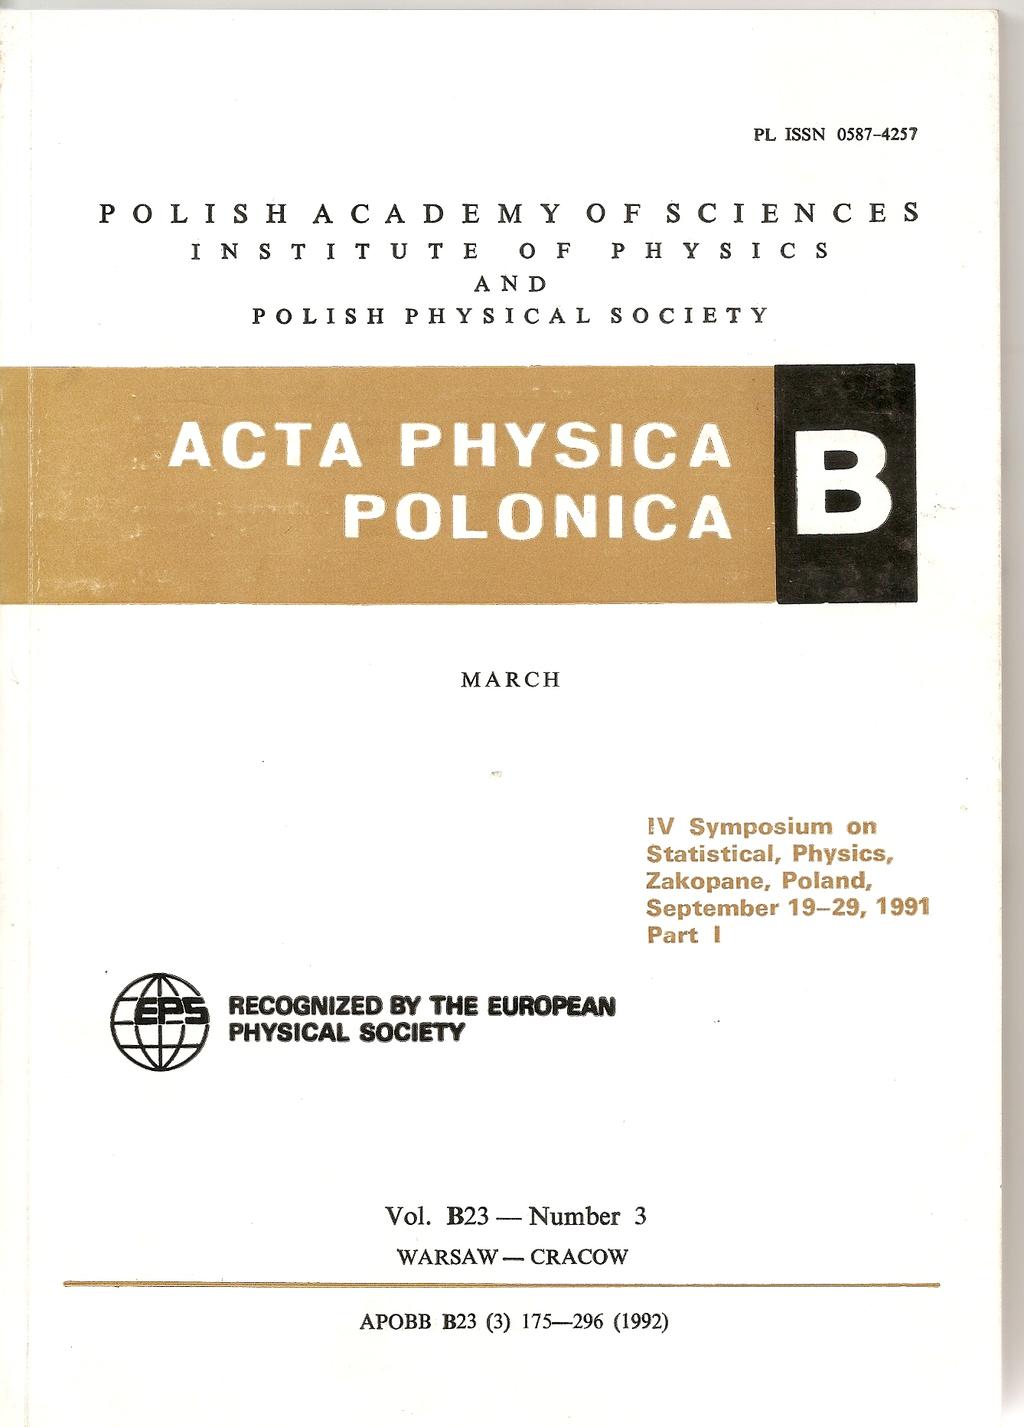 Smoluchowski : 1992 first Proceedings published in Acta Physica Polonica B, a